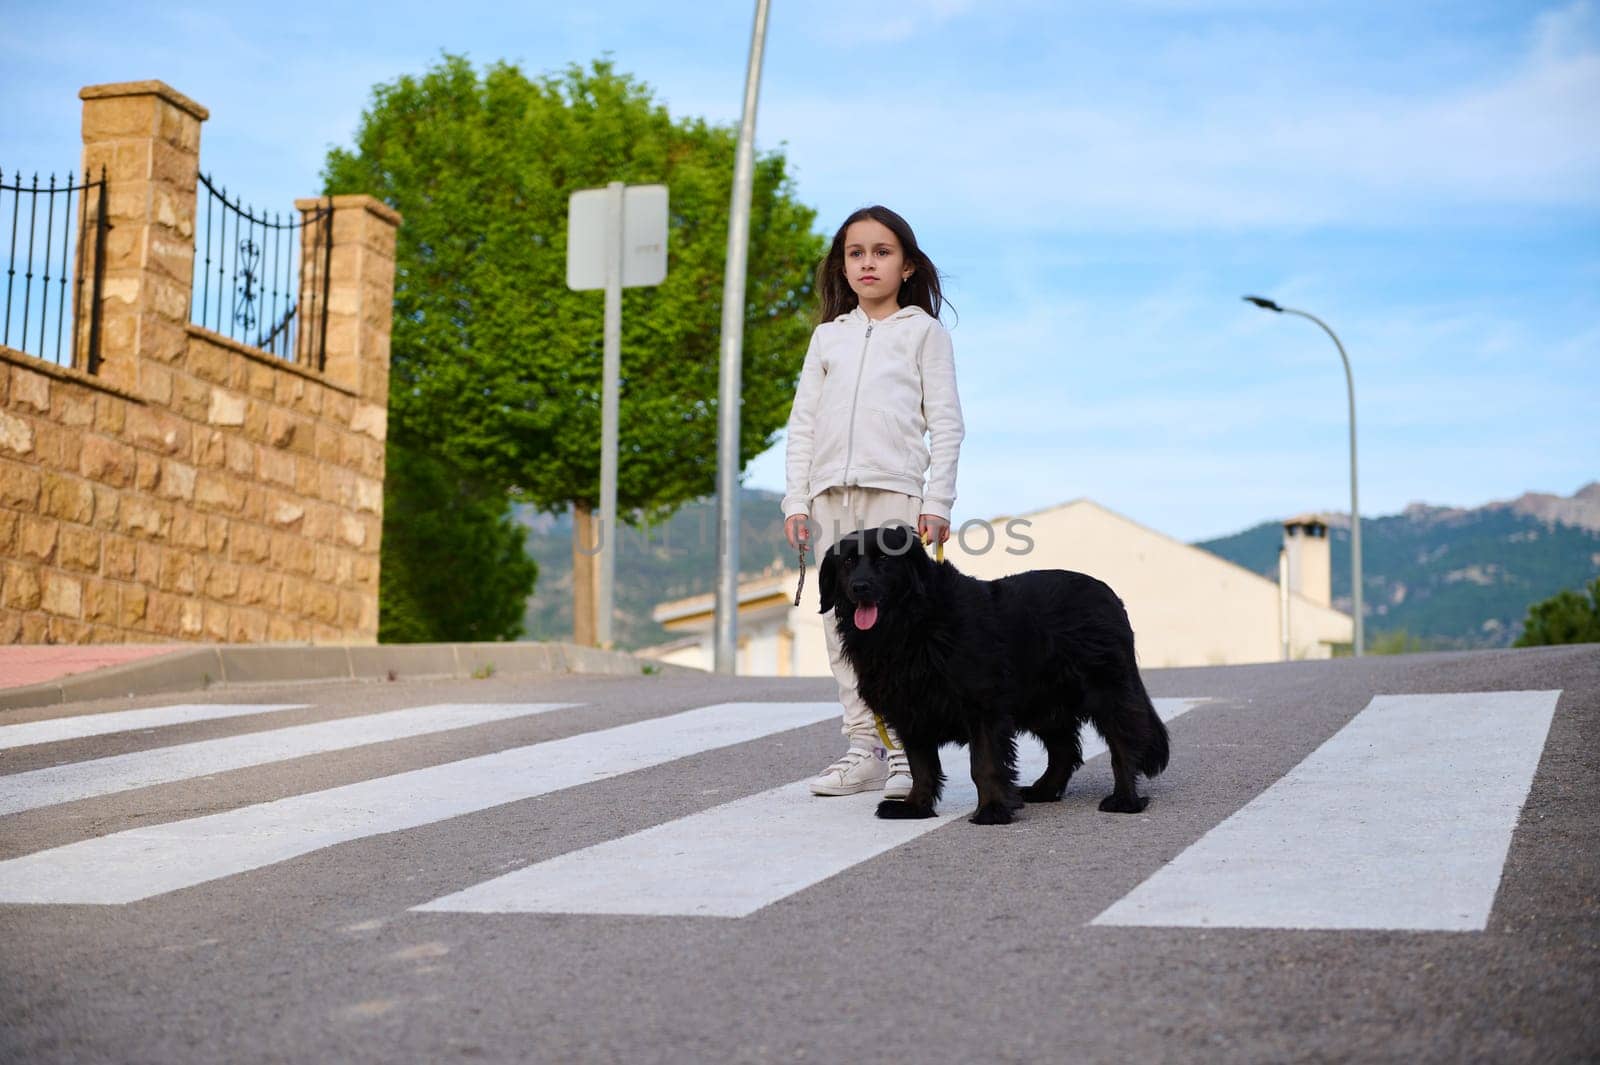 Little child girl walking her dog on the city street. Playing pets and people concept by artgf